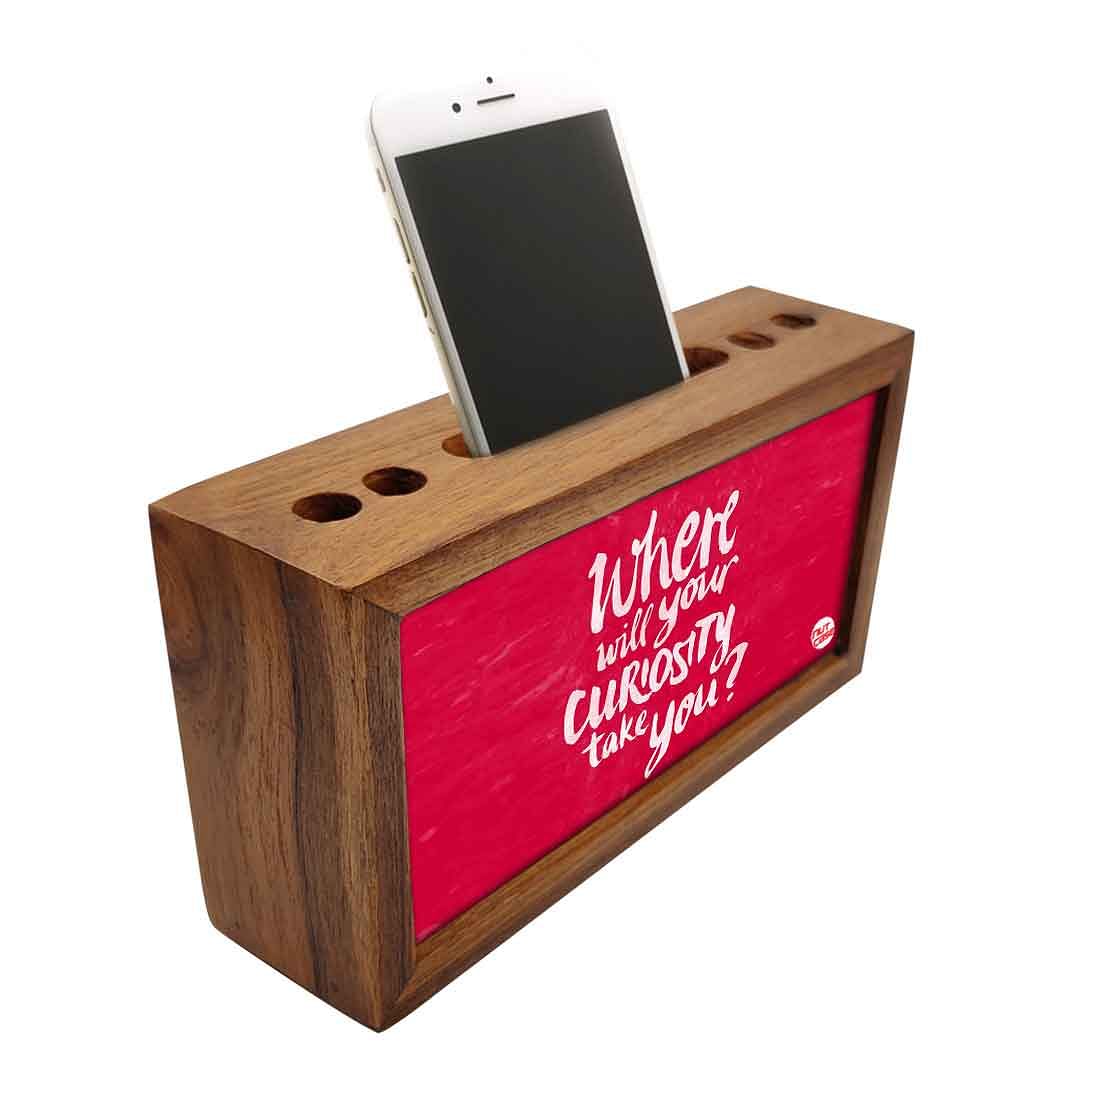 Wooden desk organizer Pen Mobile Stand - Where Will Your Curiosity Take You Nutcase